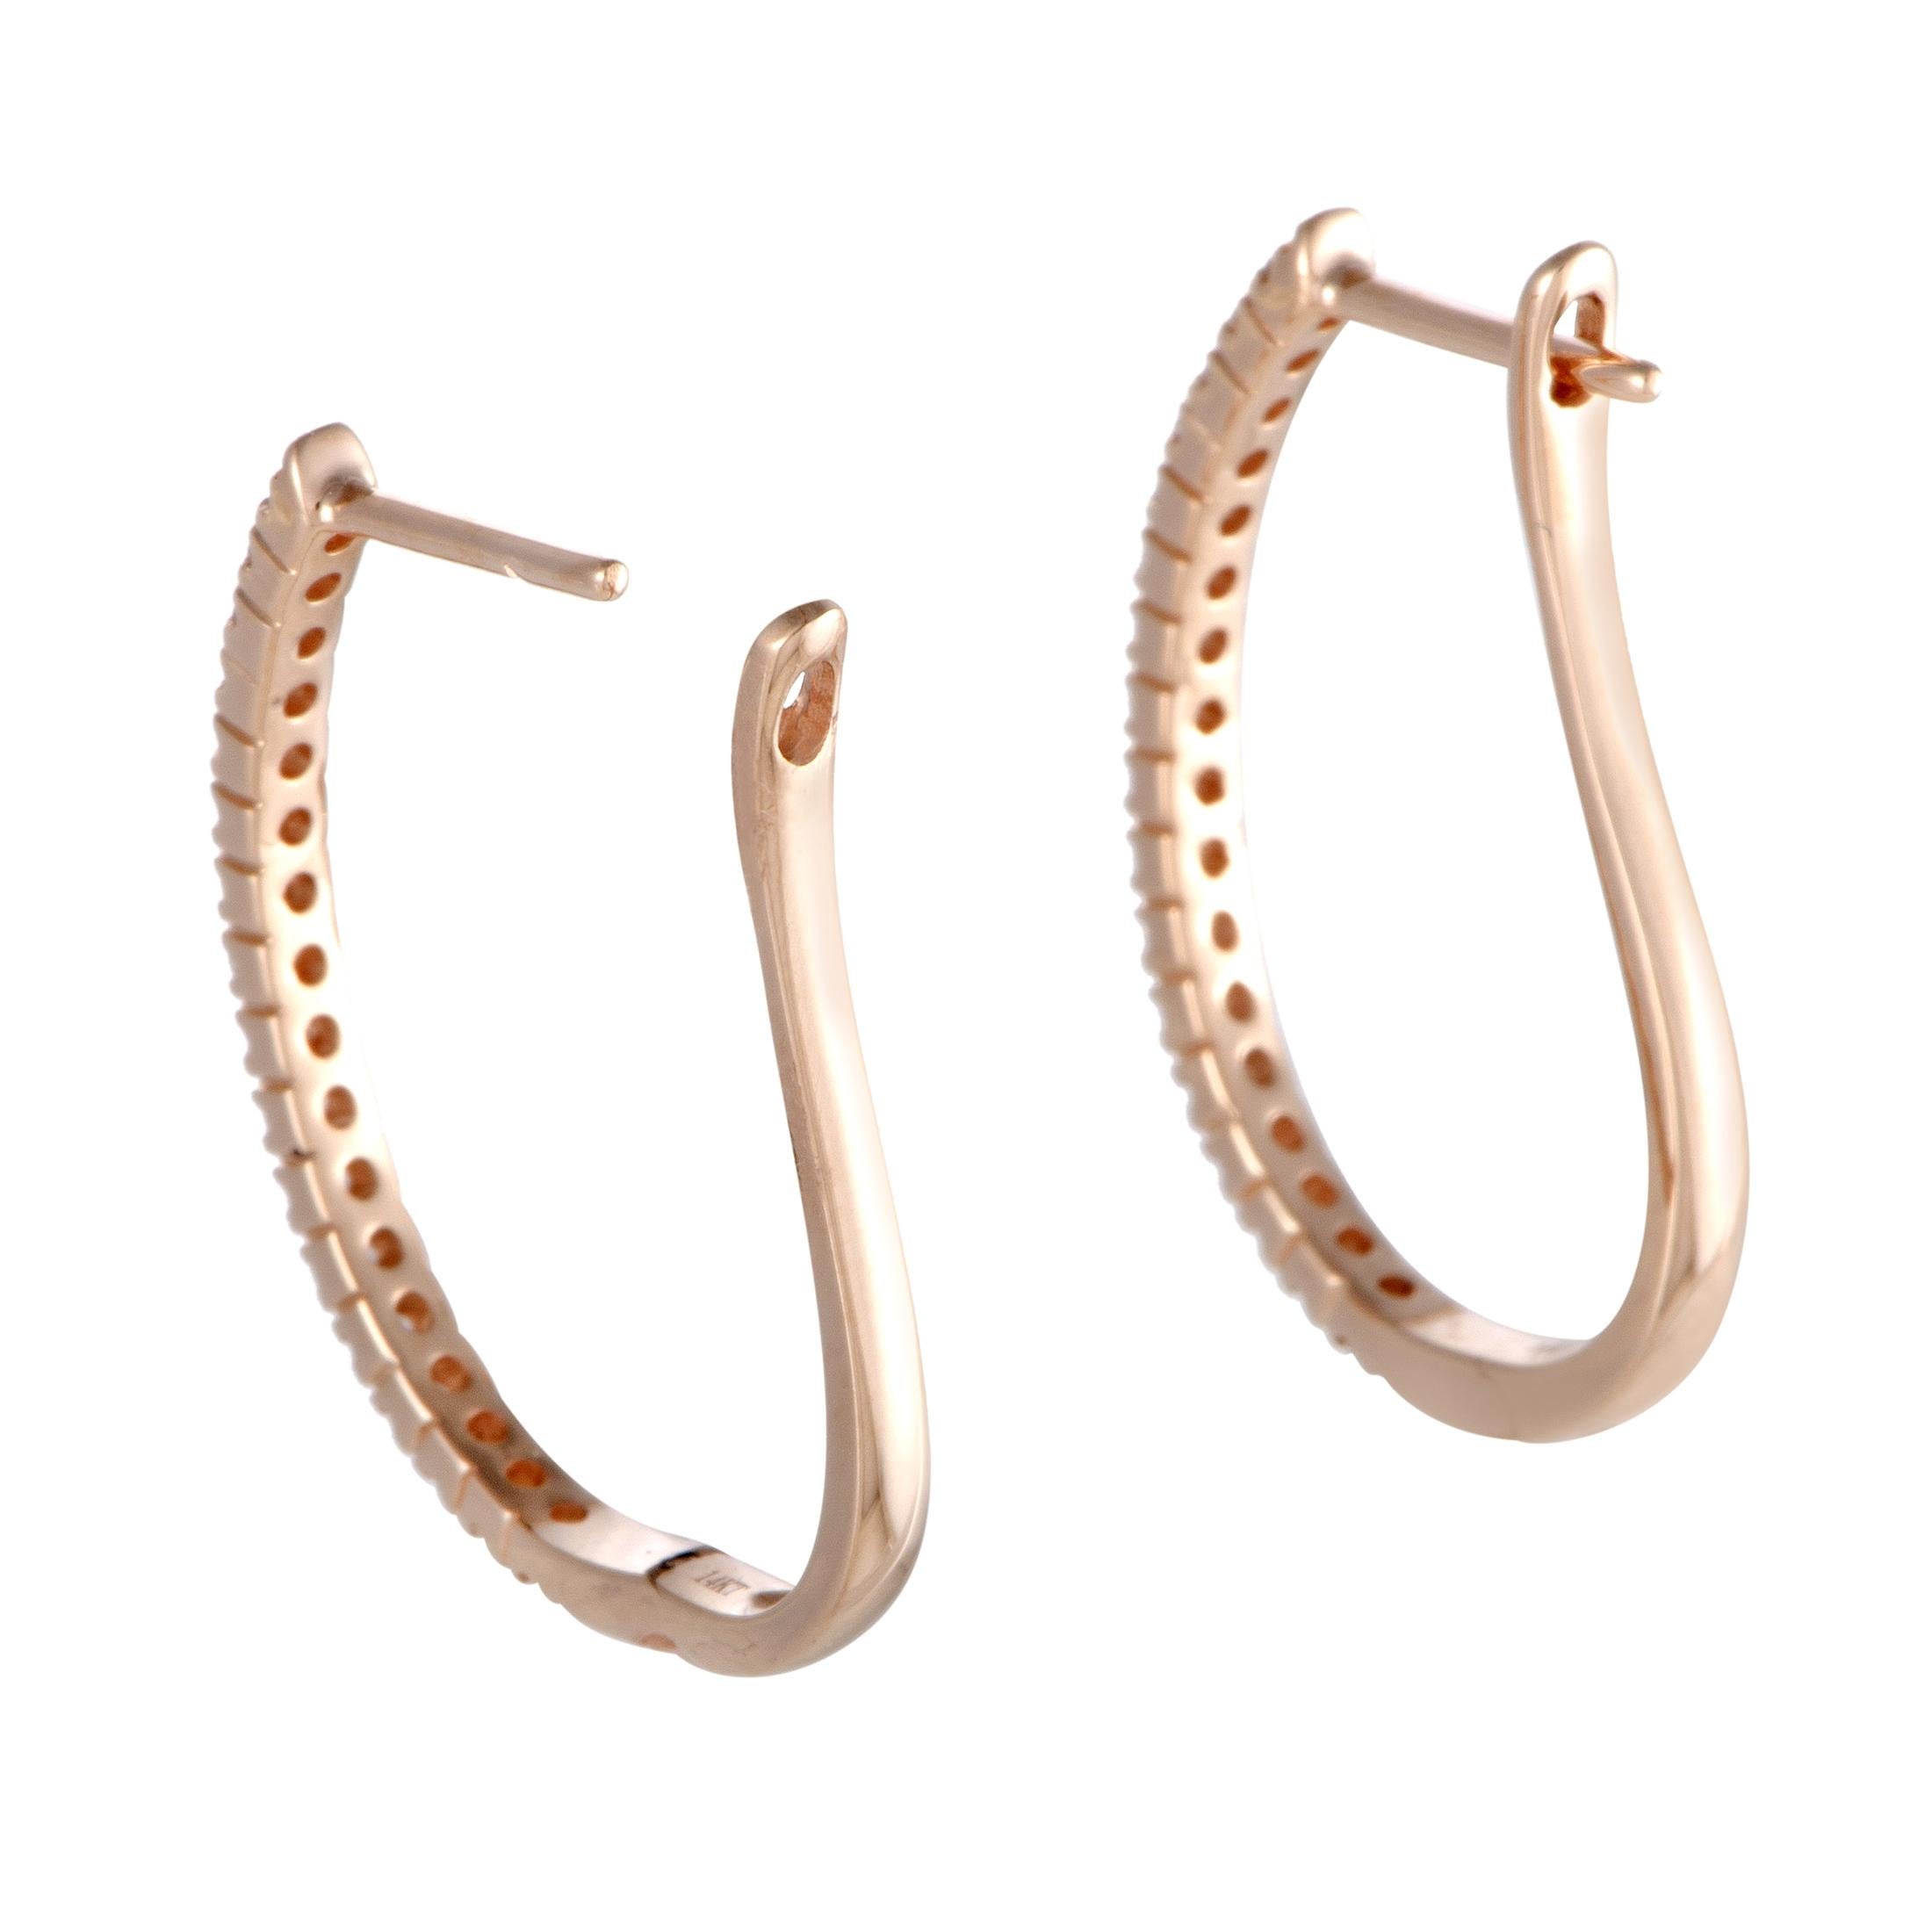 The ever-alluring 14K rose gold and the luxuriously glistening diamond stones create a delightful aesthetic effect in these graceful earrings. The pair weighs 2.9 grams and is set with a total of 0.50 carats of diamonds.
